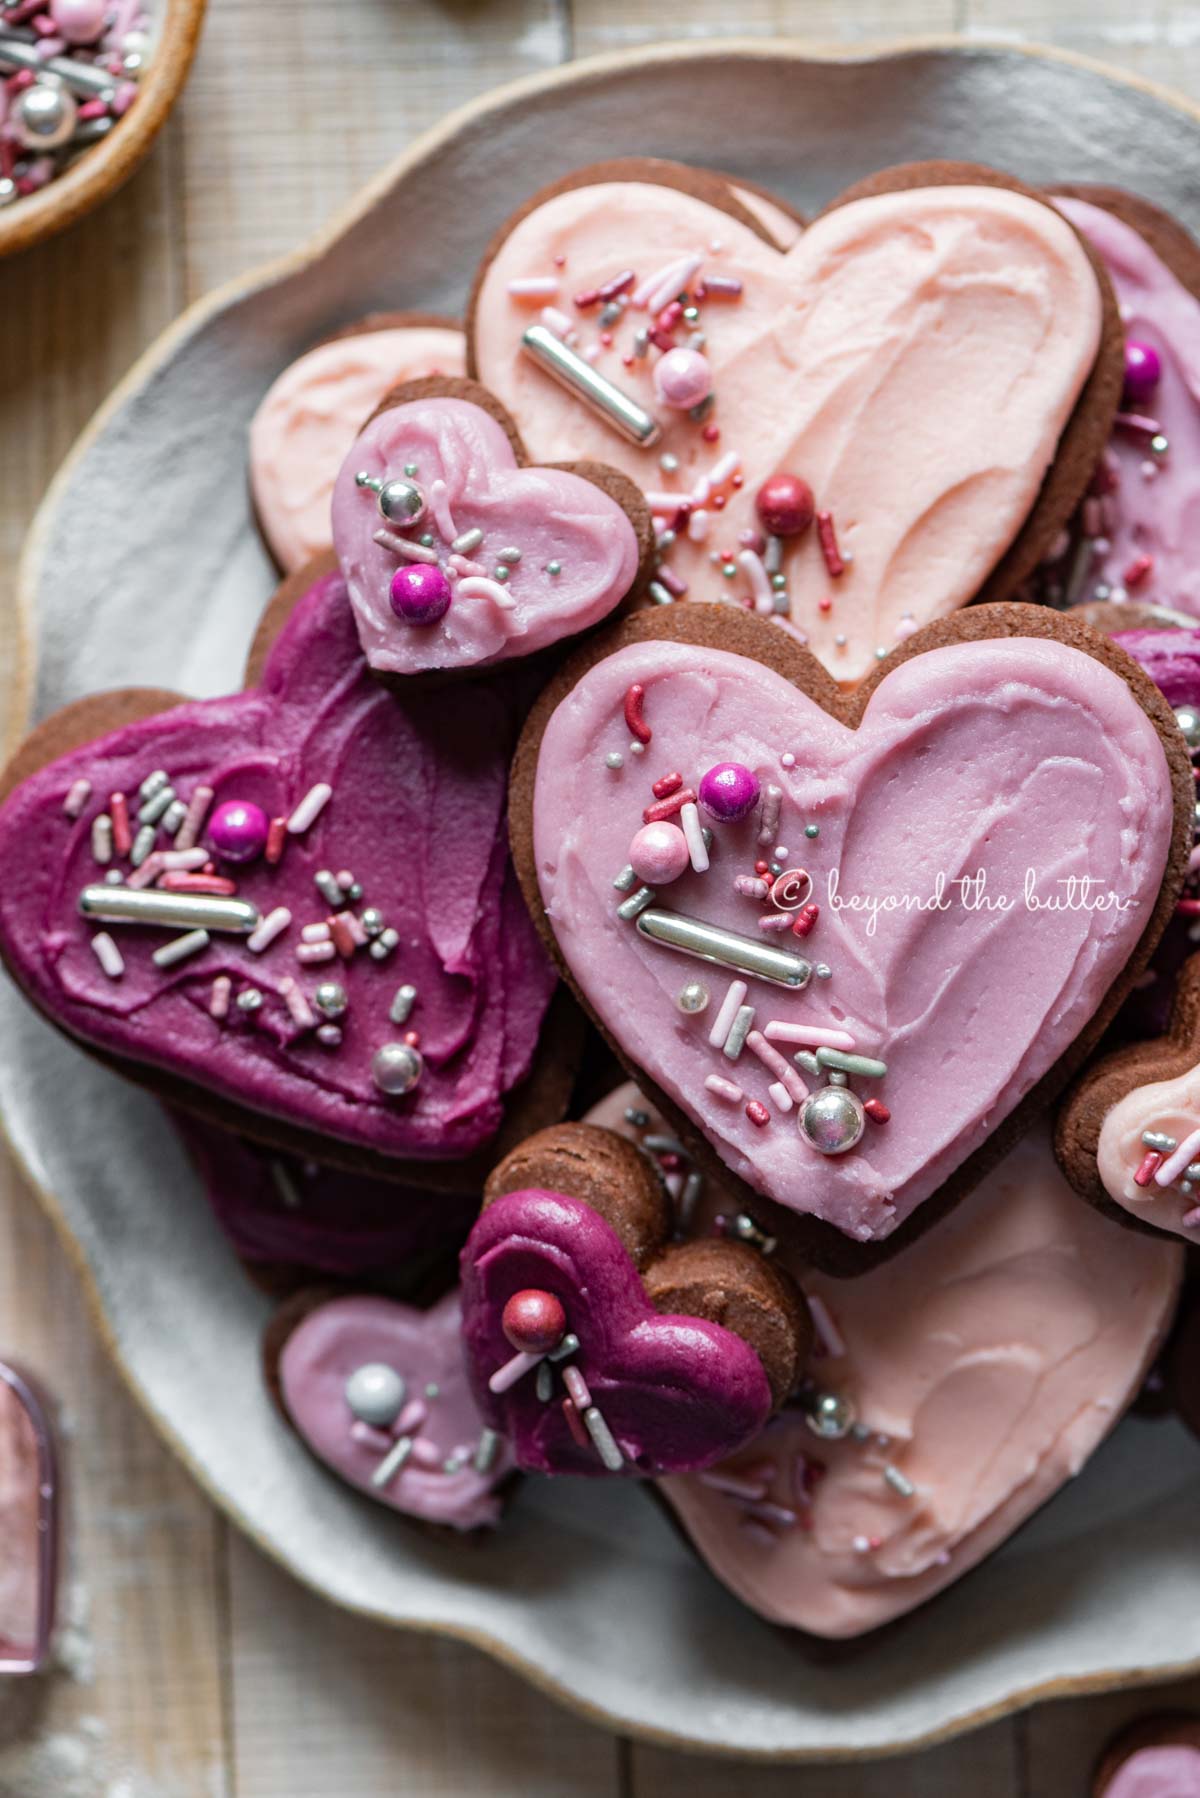 Plate full of heart-shaped chocolate cut out sugar cookies decorated with buttercream frosting and sprinkles.